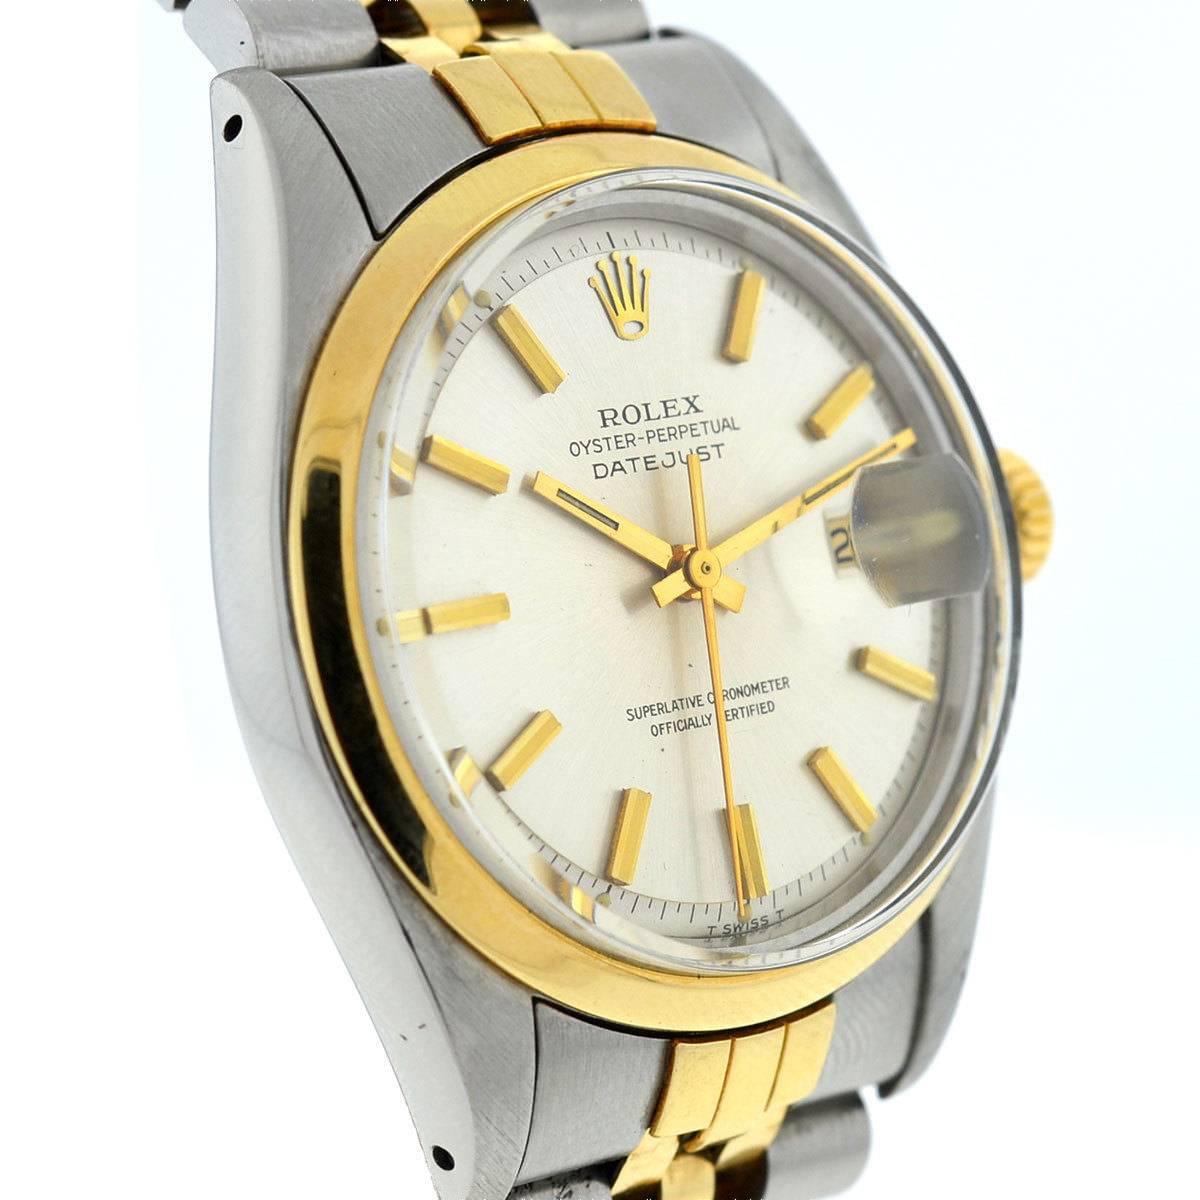 Company - Rolex
Model - Datejust 1601
Case Metal - Stainless Steel
Case Size - 36mm
Dial - Silver
Bracelet - 14k Yellow Gold Two-Tone Jubilee with Clasp - will fit up to a 7